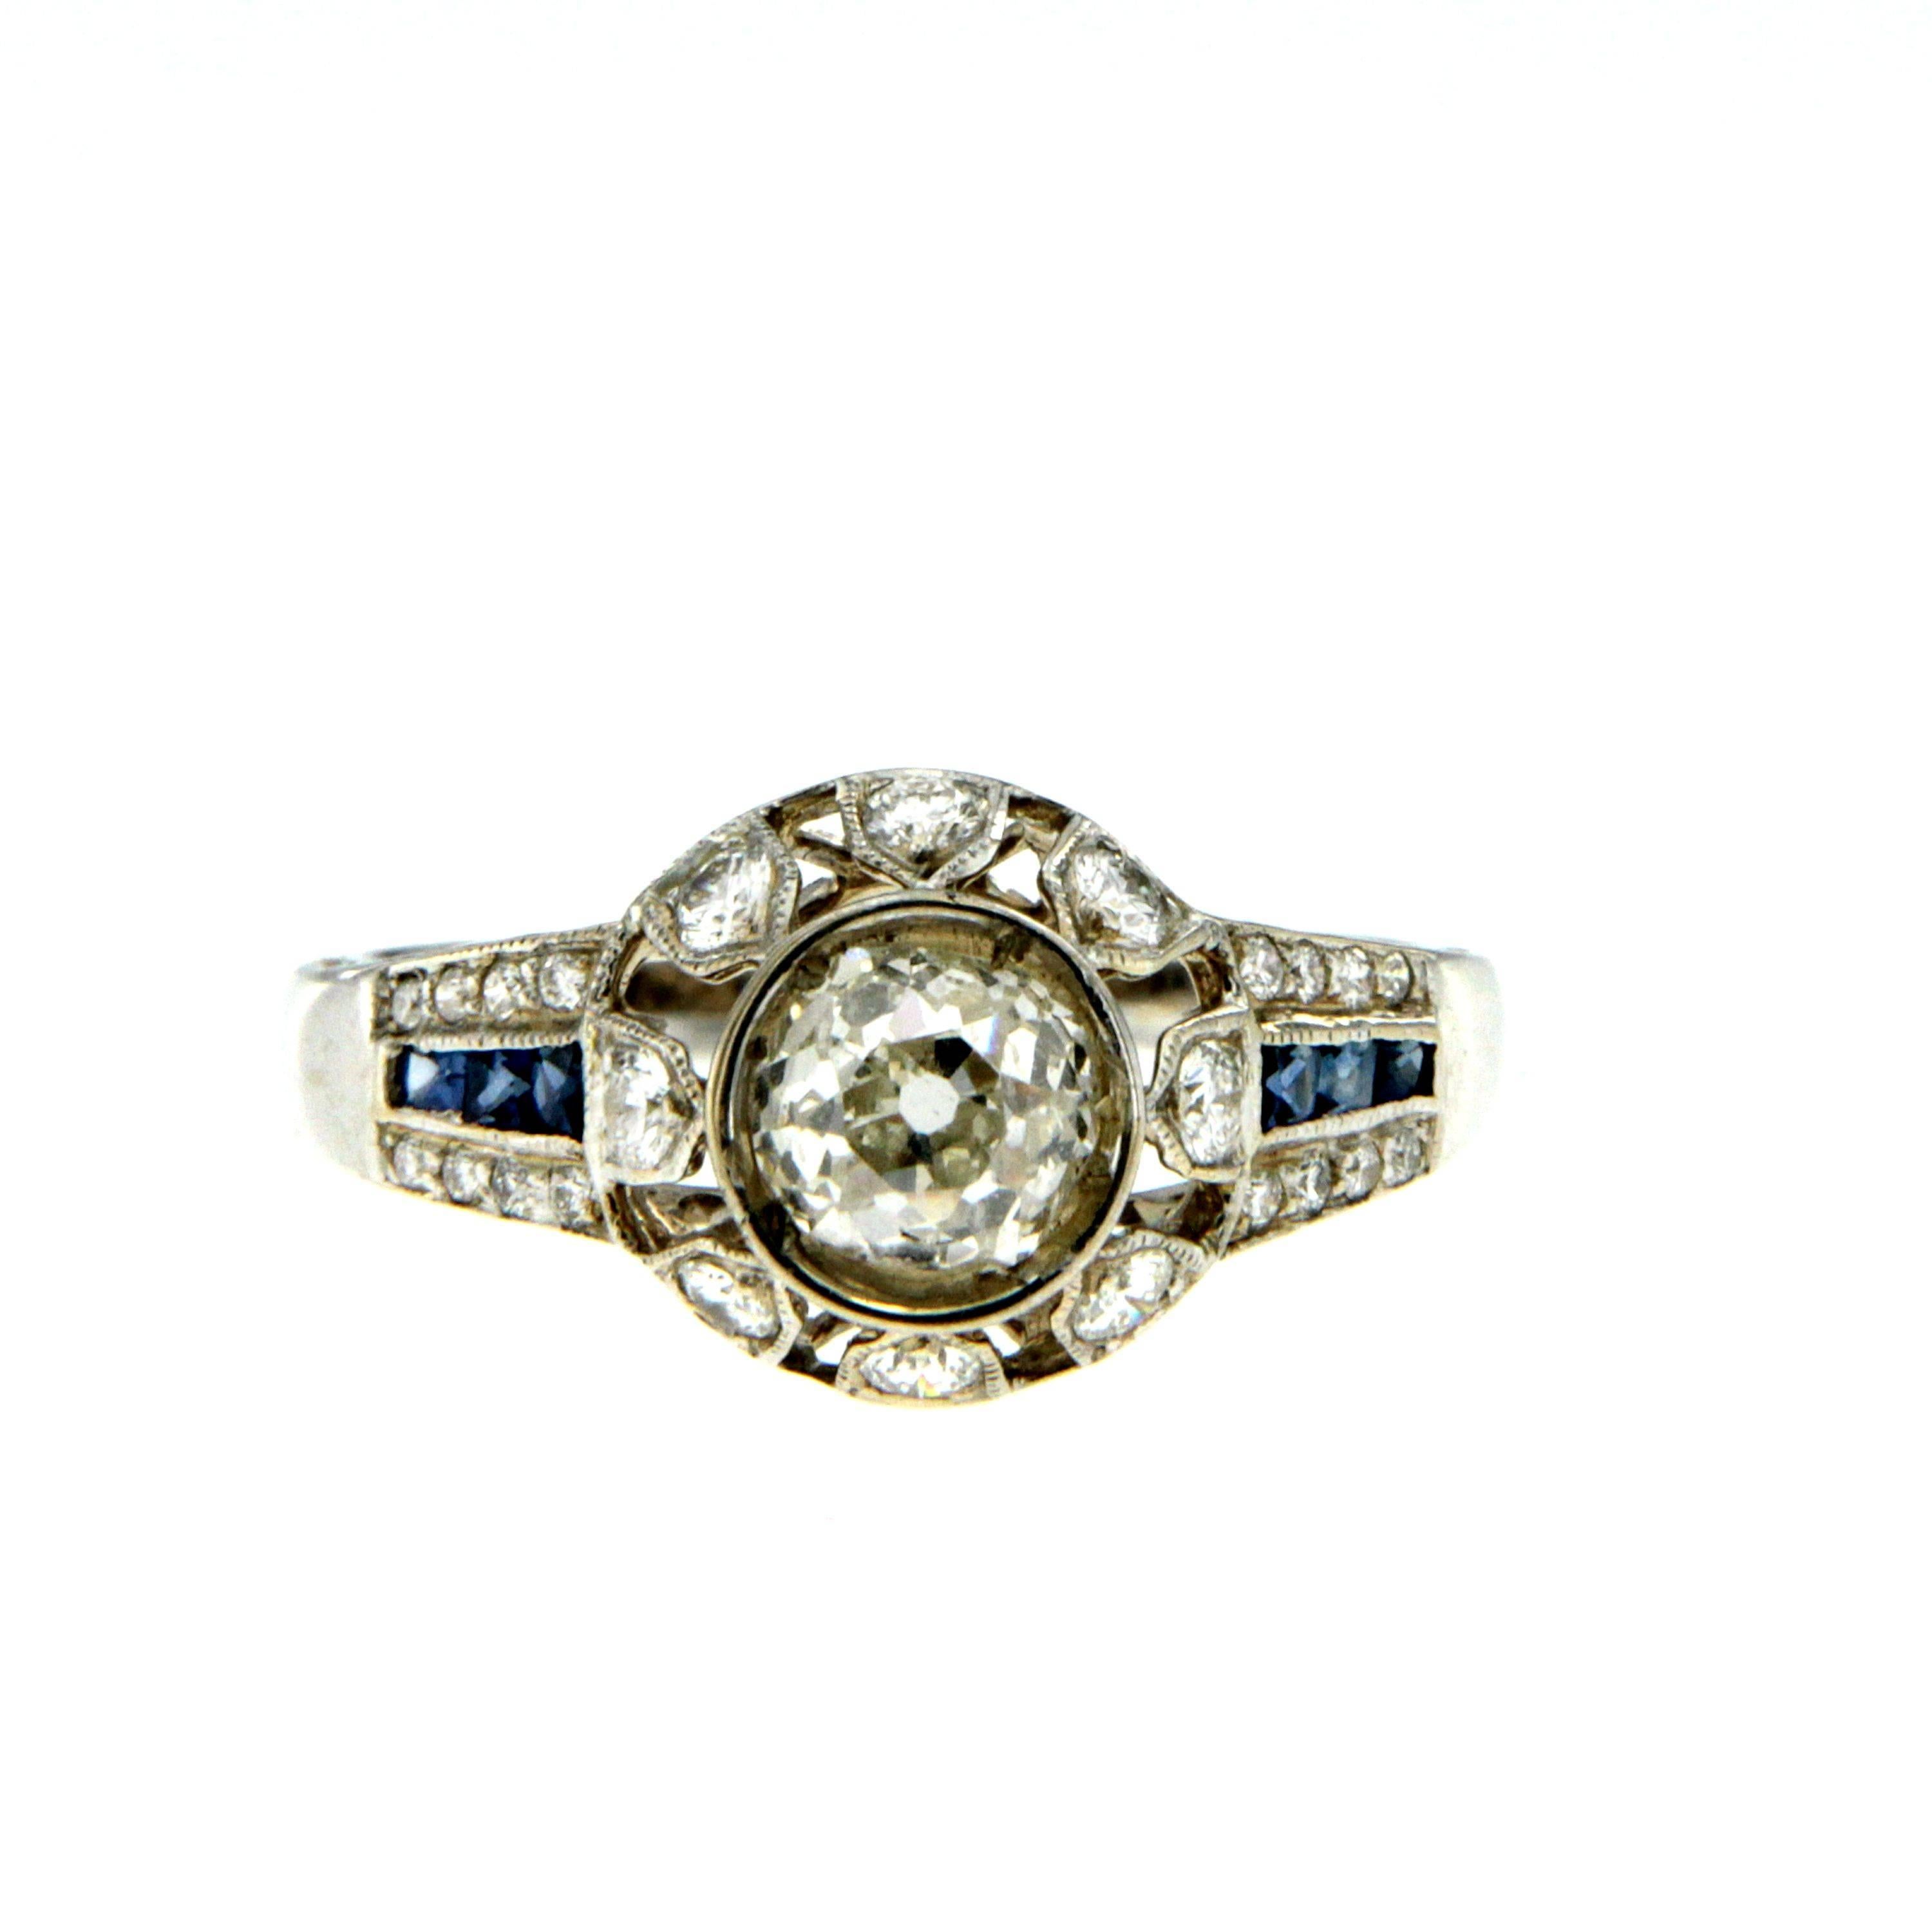 An Antique Art Deco 18k Gold Diamond & Sapphire Ring featuring a stunning 0.90ct. old mine cut Diamond with VS1 Clarity I Color, surrounded by 0.50ct. of diamonds and 0.20ct square cut Sapphires.
The ring has rigorous quality workmanship .
Gross